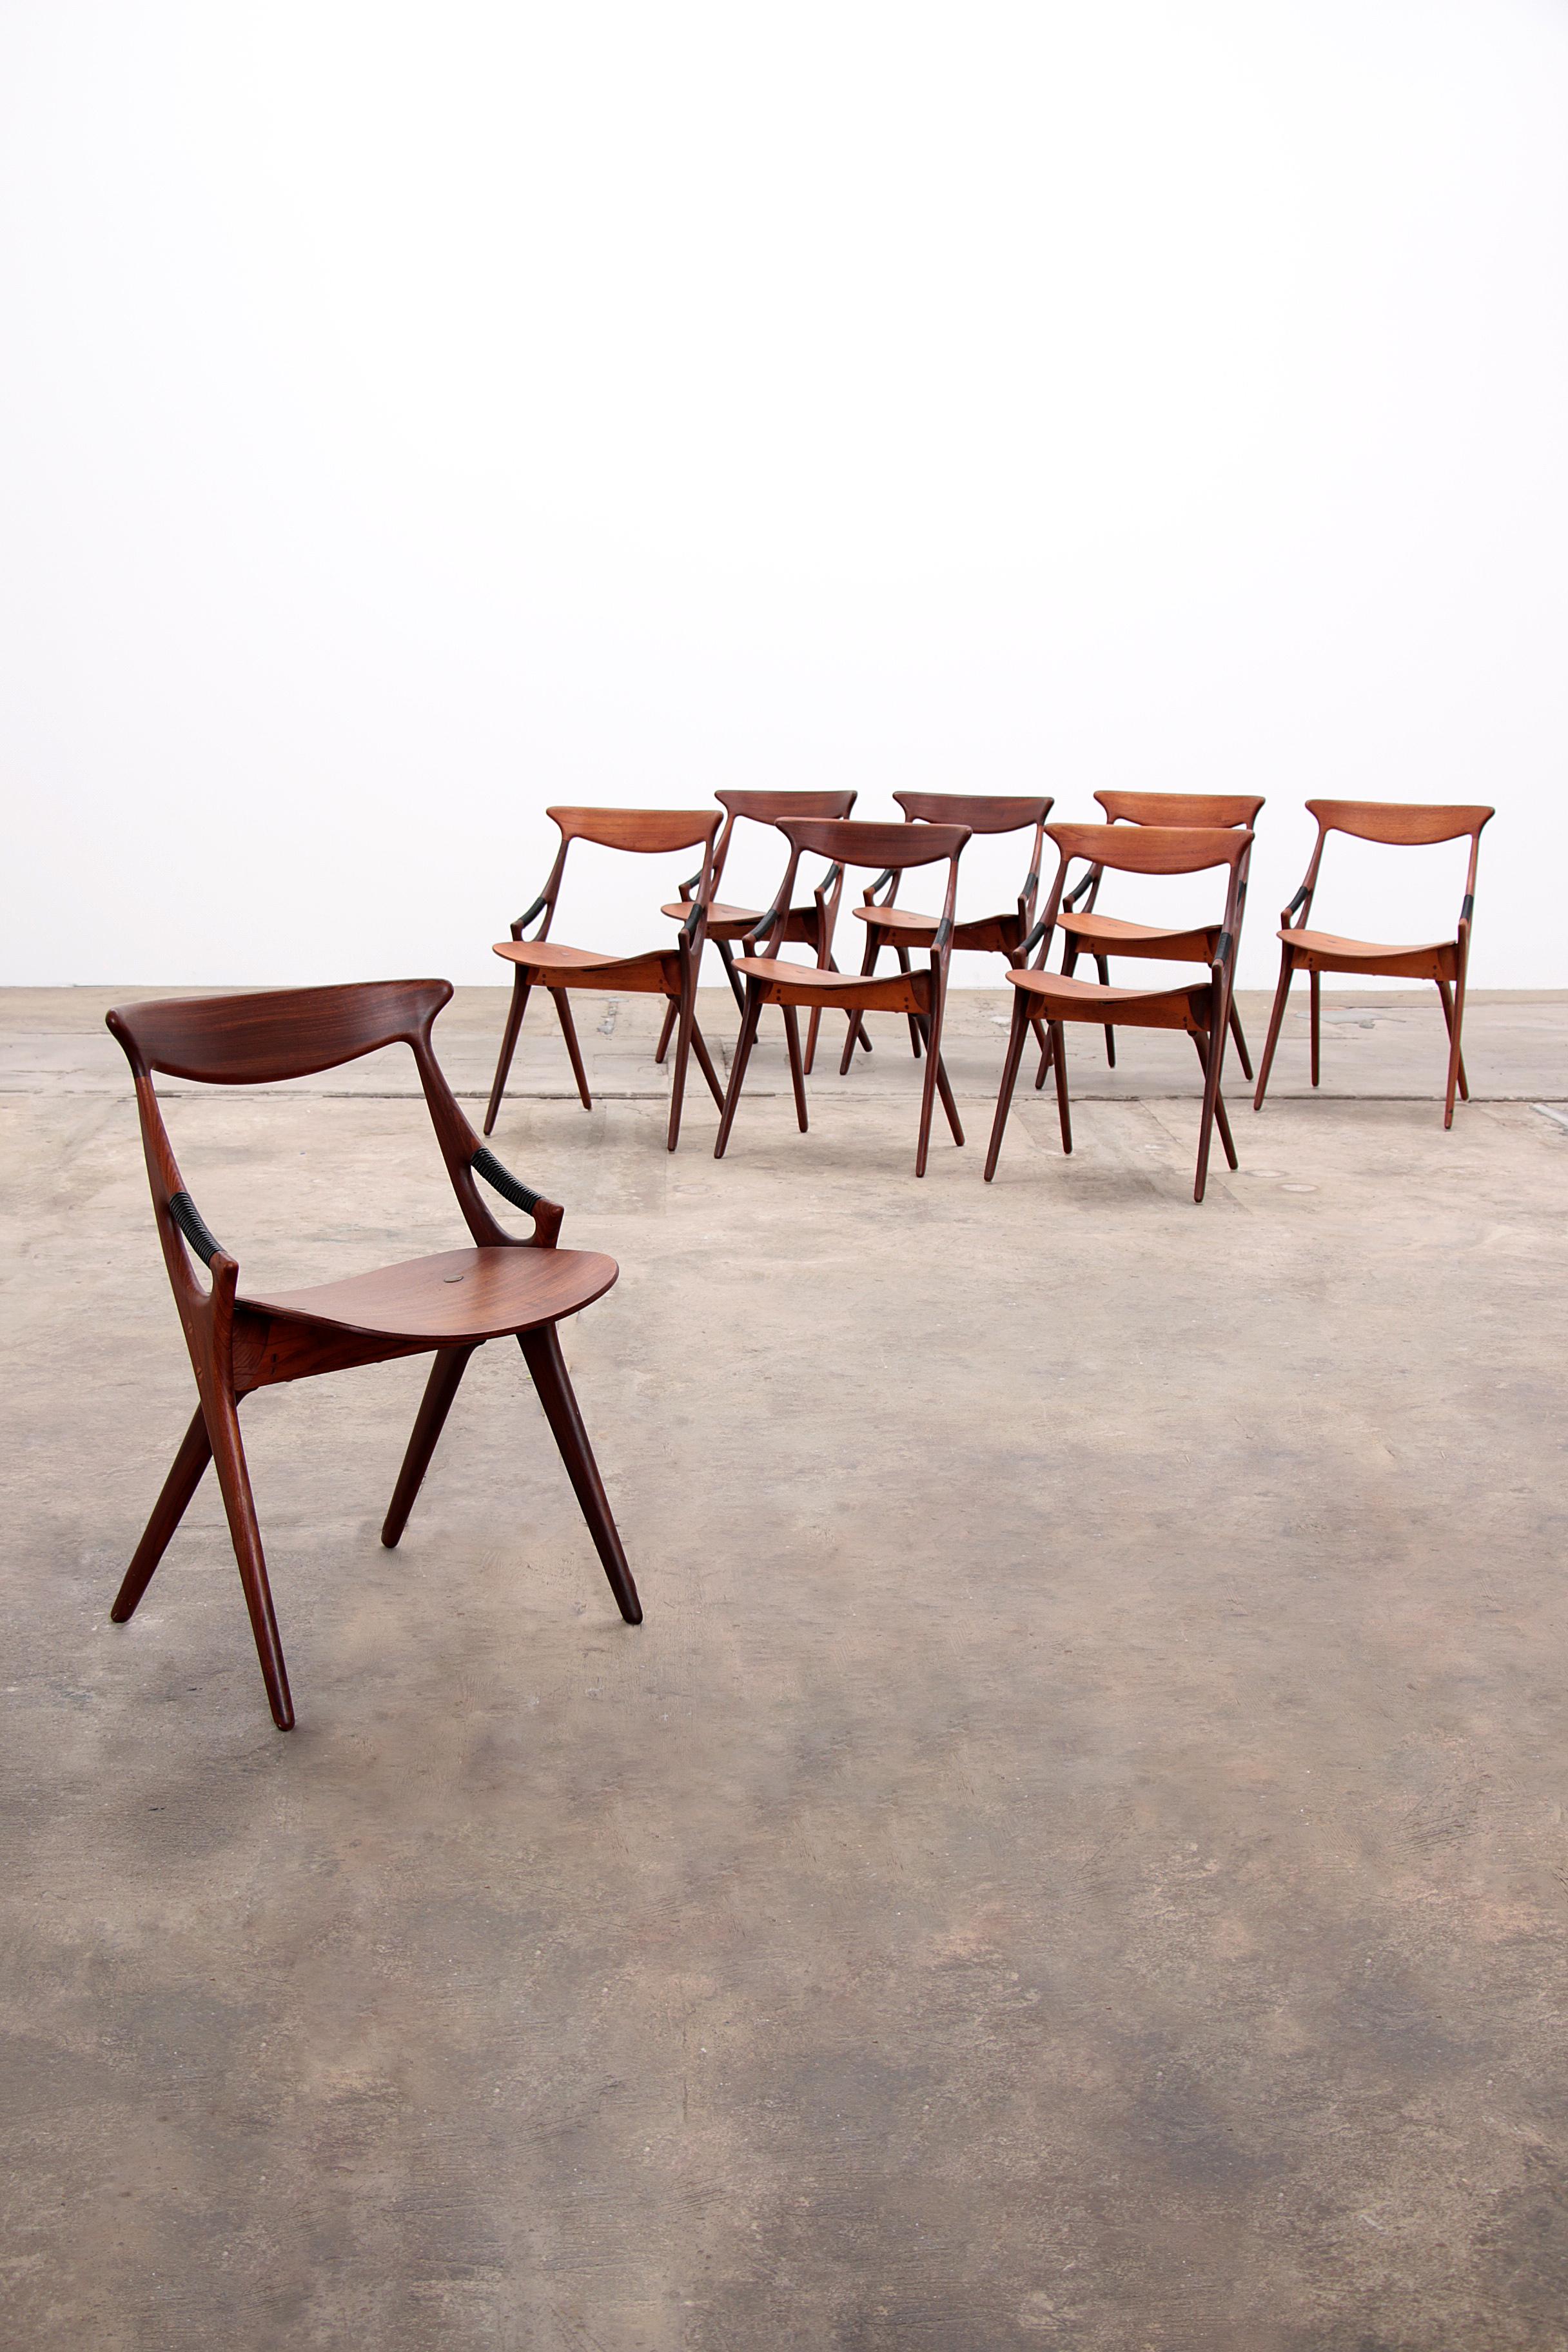 Set of 8 dinning chairs model 71, Arne Hovmand Olsen for Mogens Kold, 1960s

Discover the timeless elegance of the Arne Hovmand-Olsen designer chair, a masterpiece that embodies the essence of Scandinavian design. This vintage chair, manufactured in